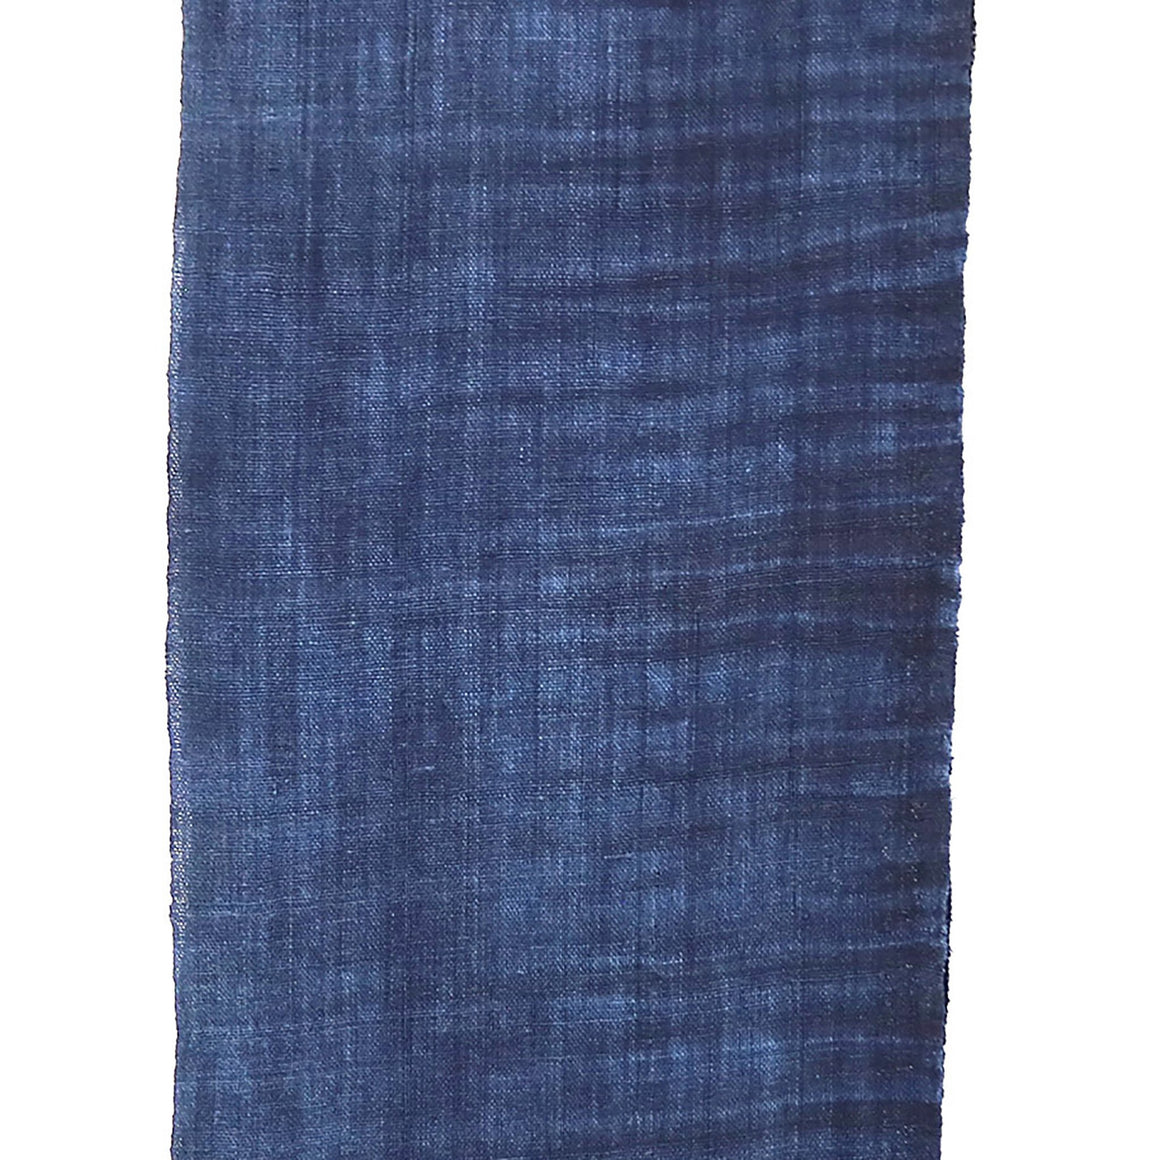 INDIGO BLUE HAND WOVEN ~ HAND DYED 100% RECYCLED HEMP SCARF SCARVES ZENZOEY JEWELRY & ACCESSORIES 